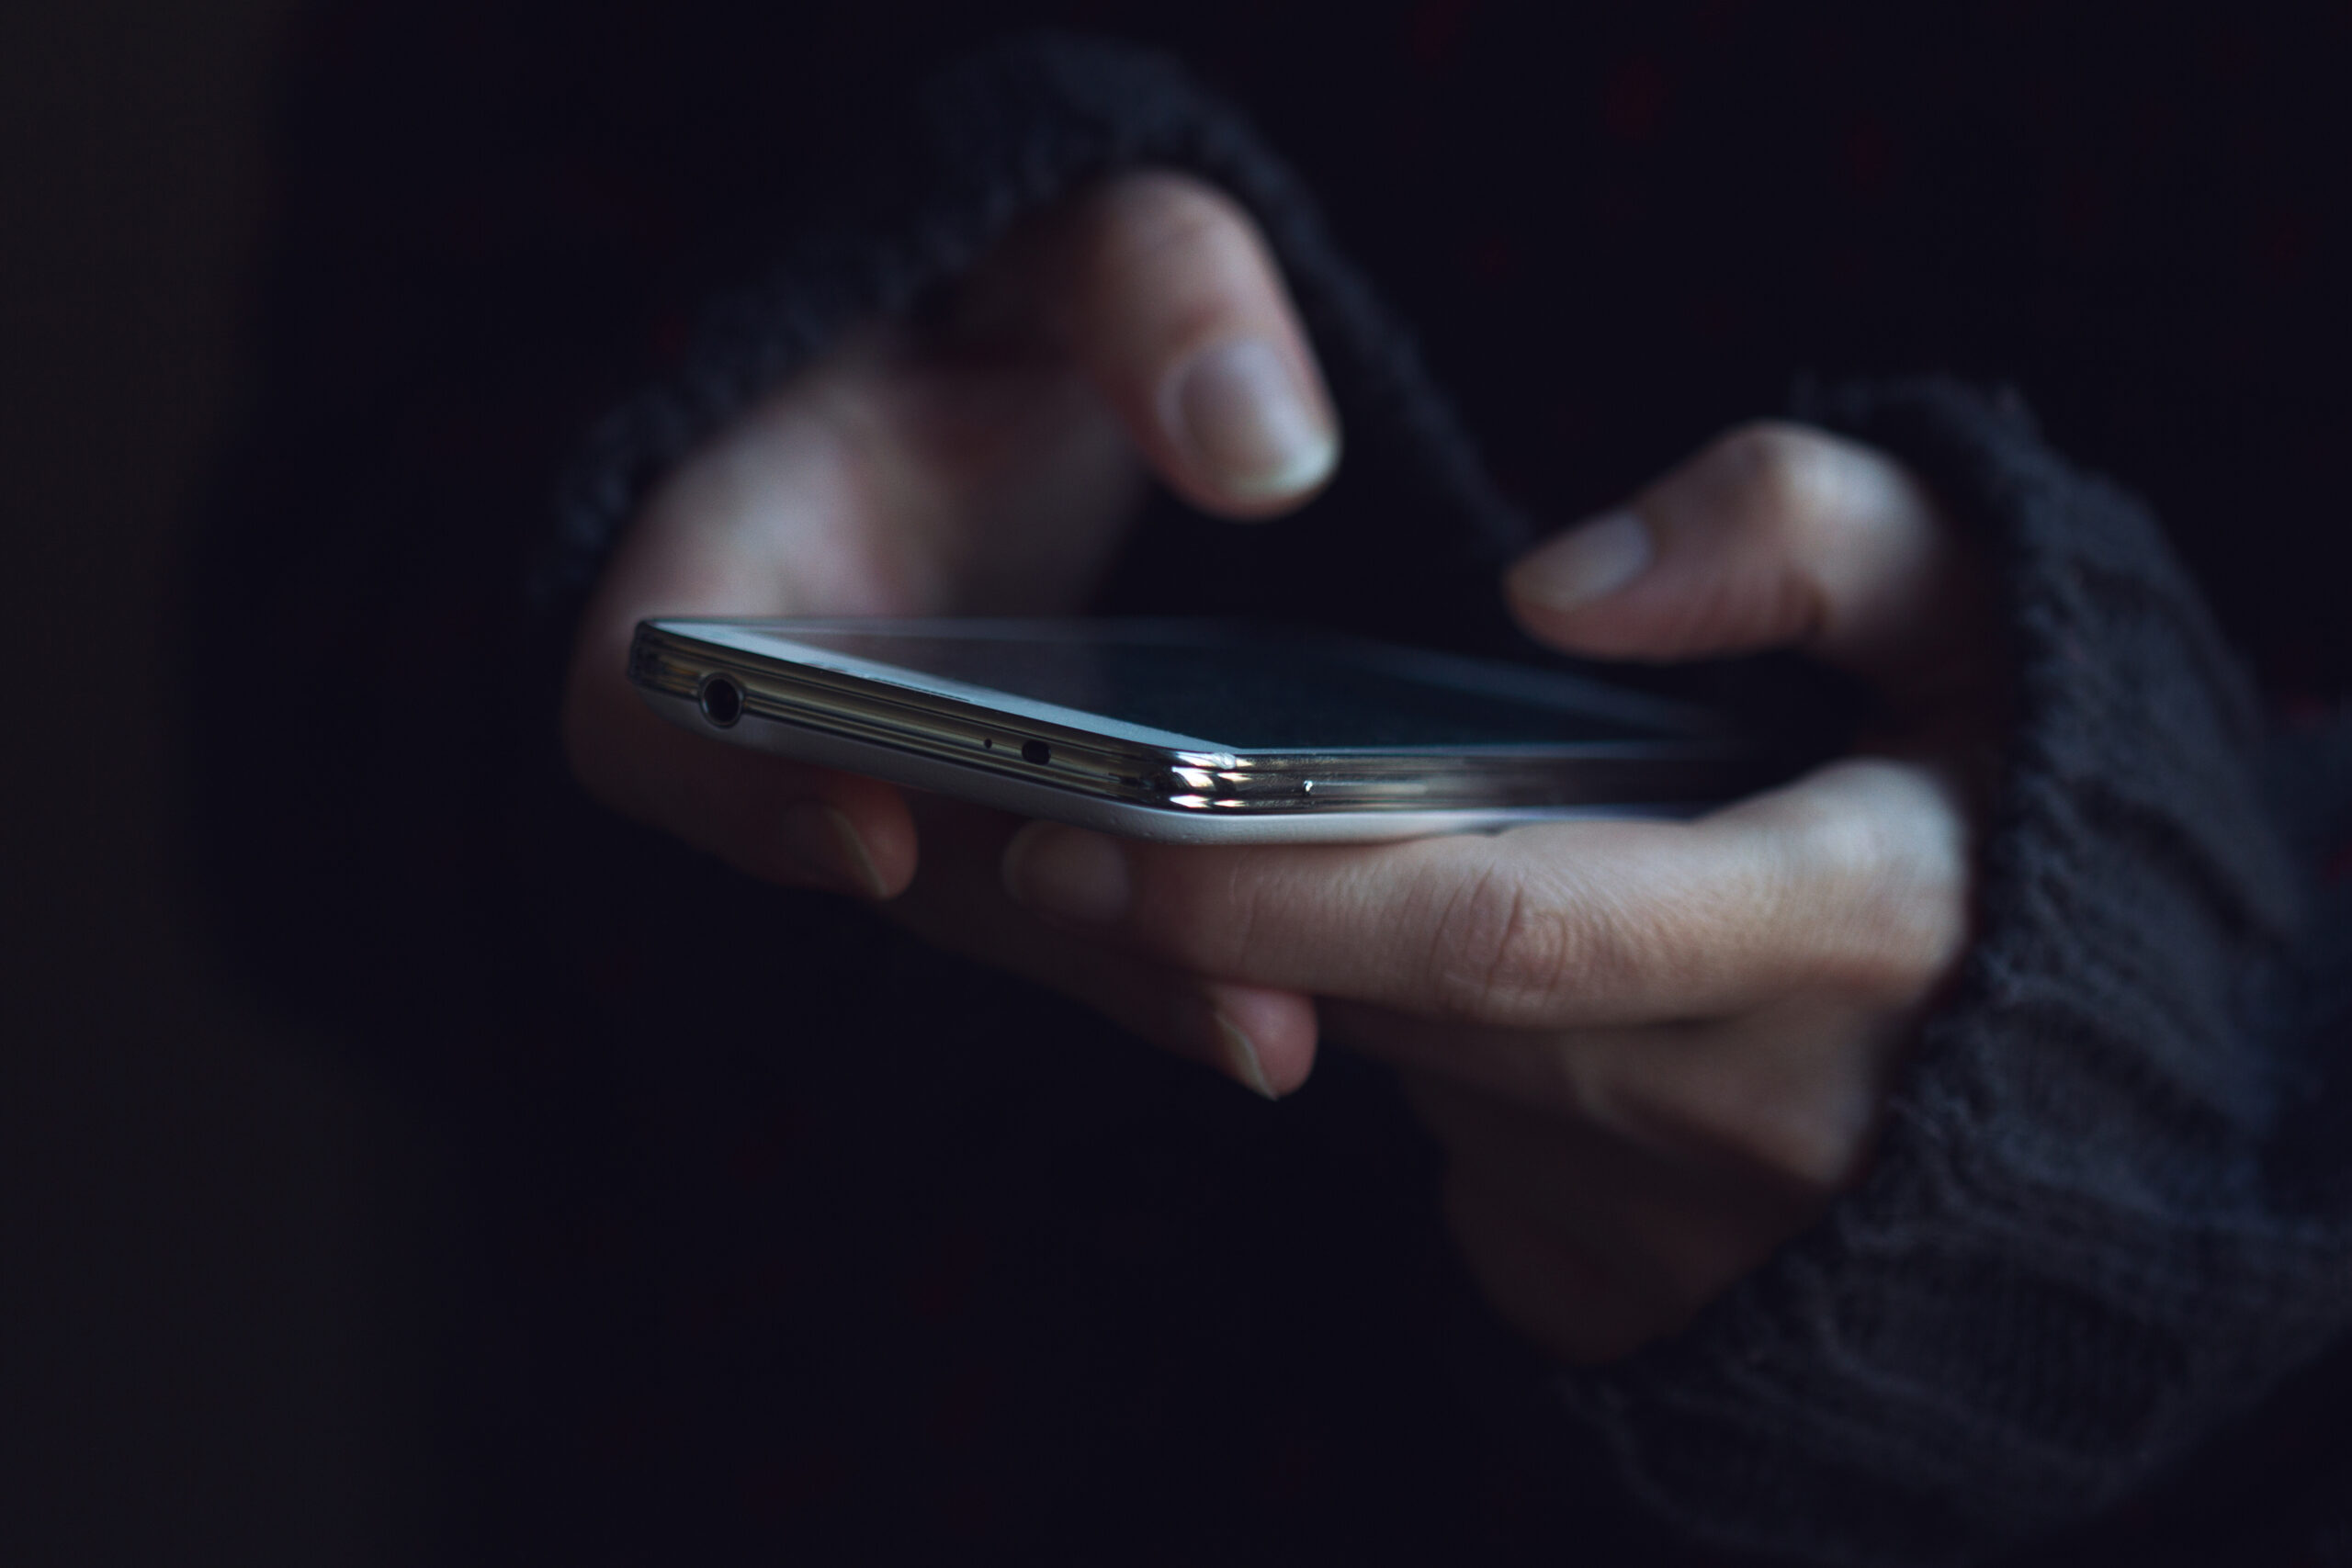 woman in dark sweater hands holding a phone